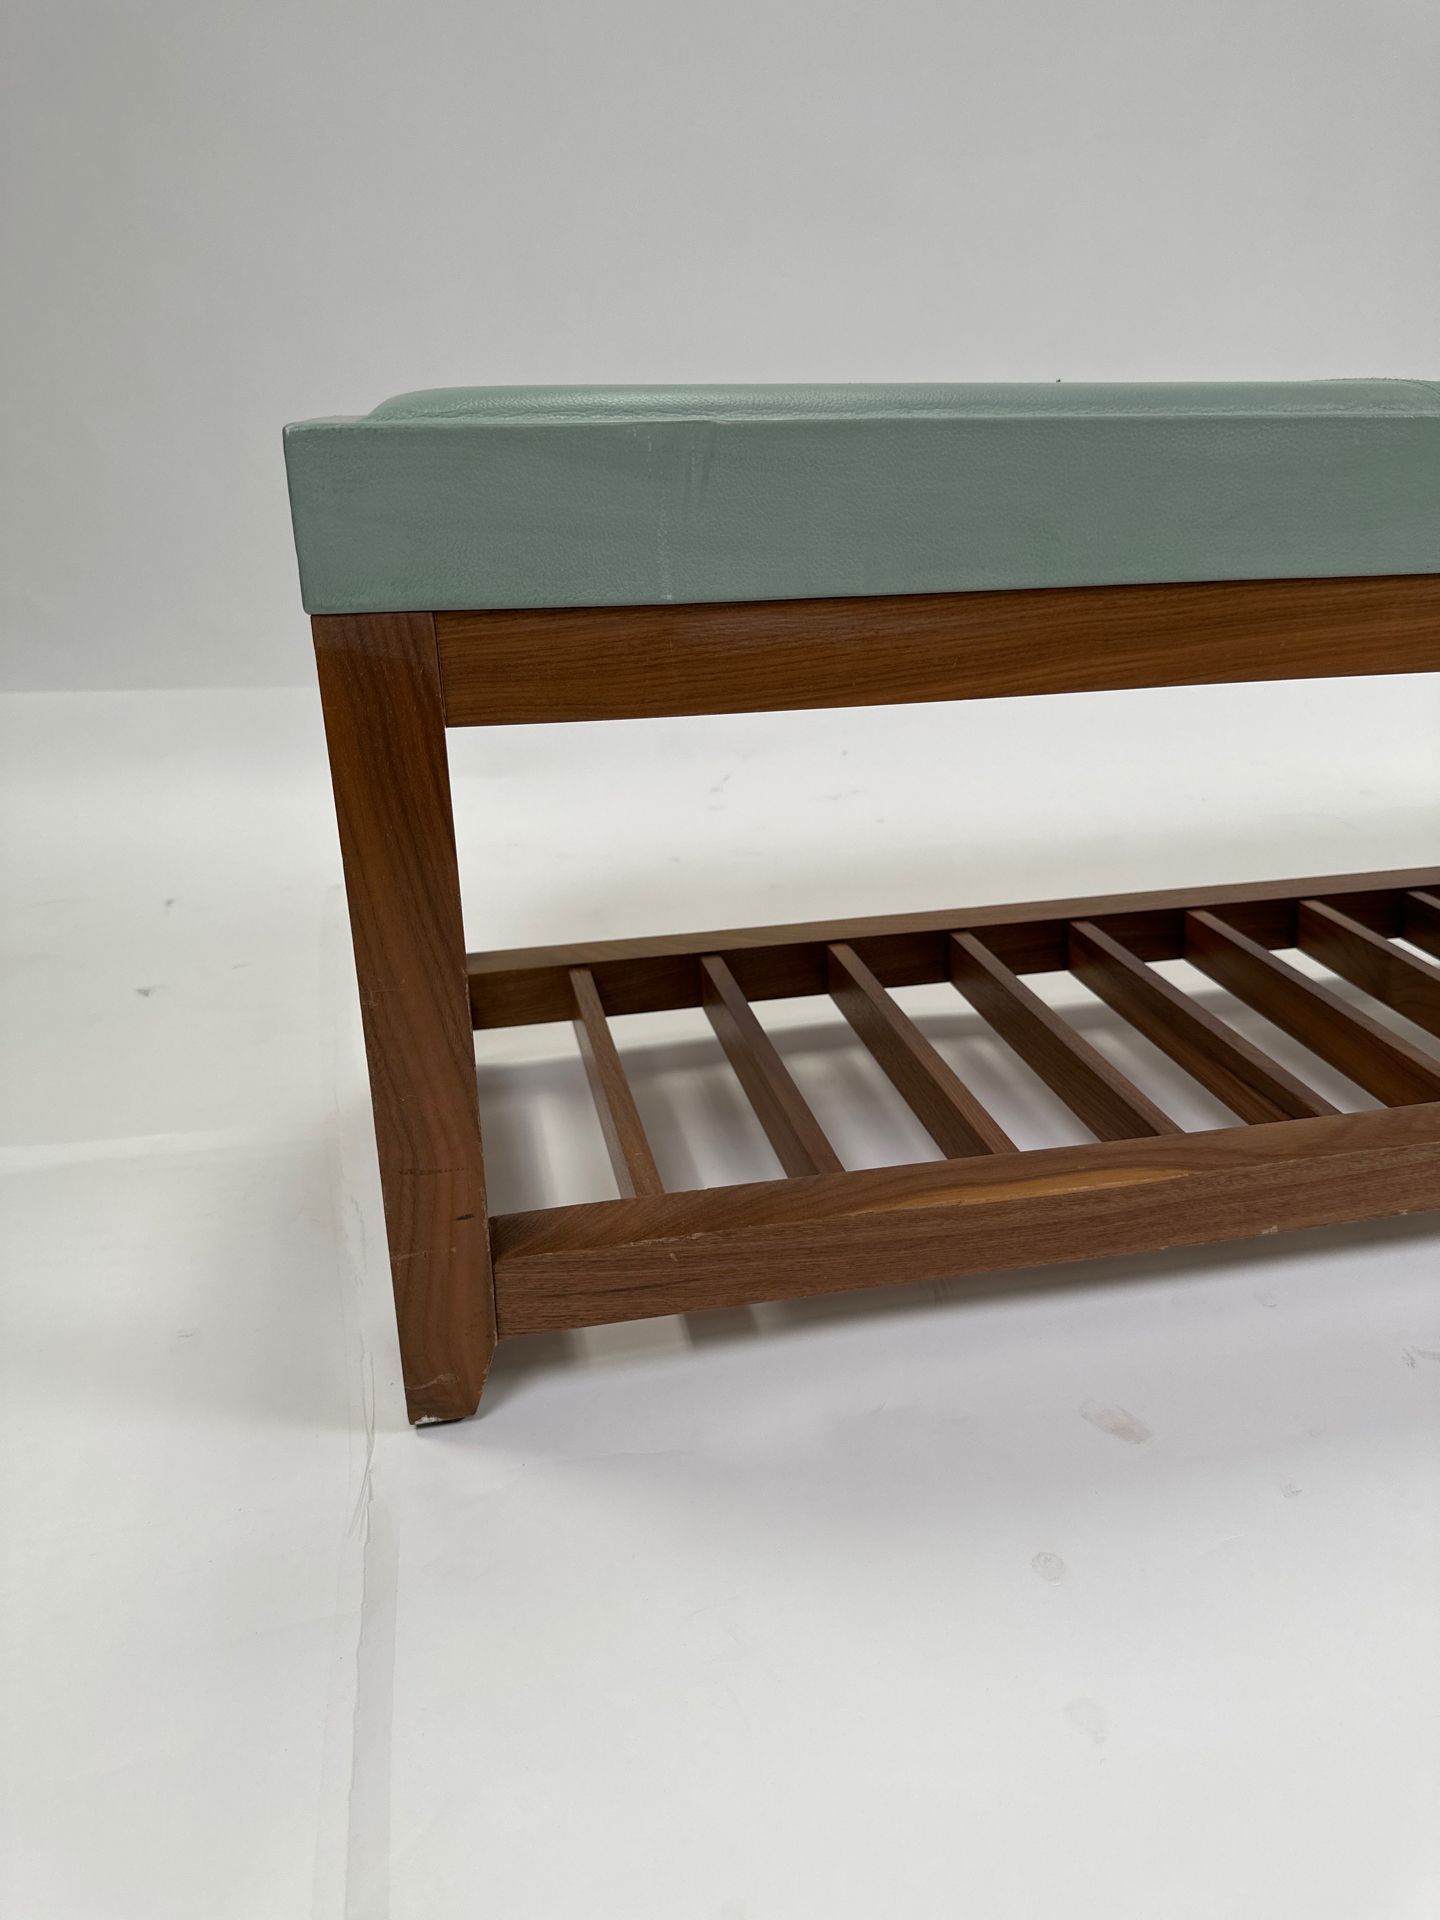 Large Leather Bench with Slats - Image 4 of 5